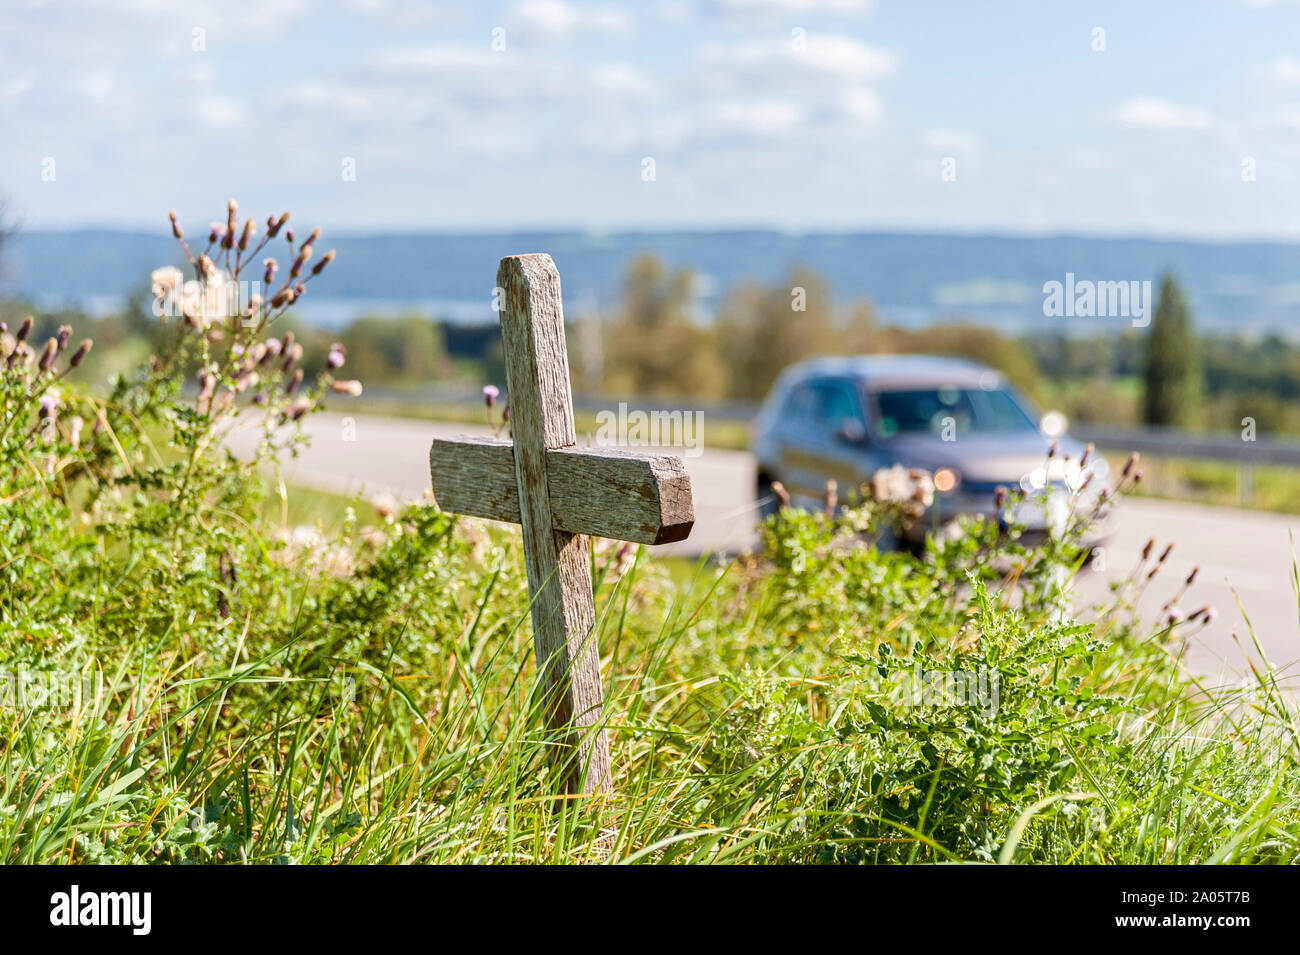 Wayside Cross for Road Deaths beside Road - Marterl, Germany Stock Photo